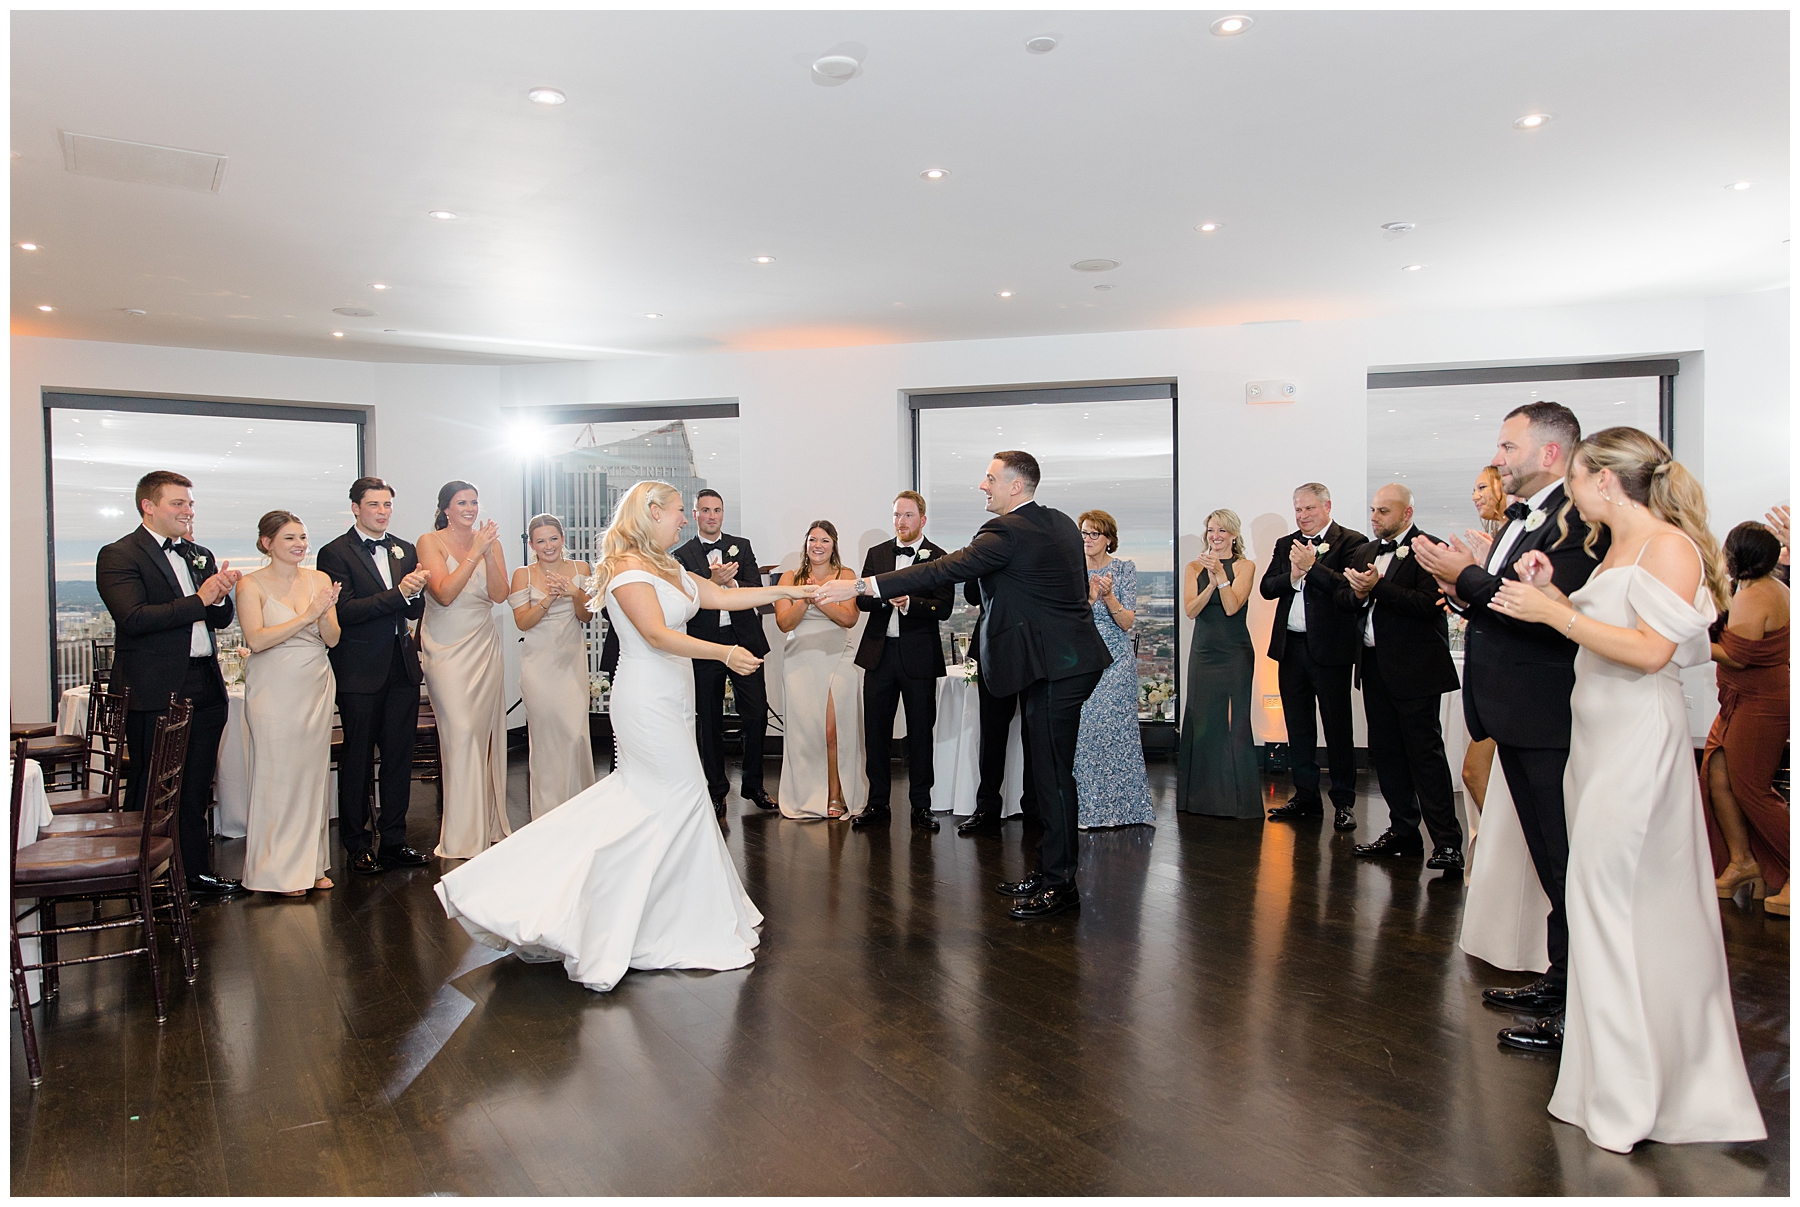 Boston City Dream Wedding at The State Room: A Longwood Venue